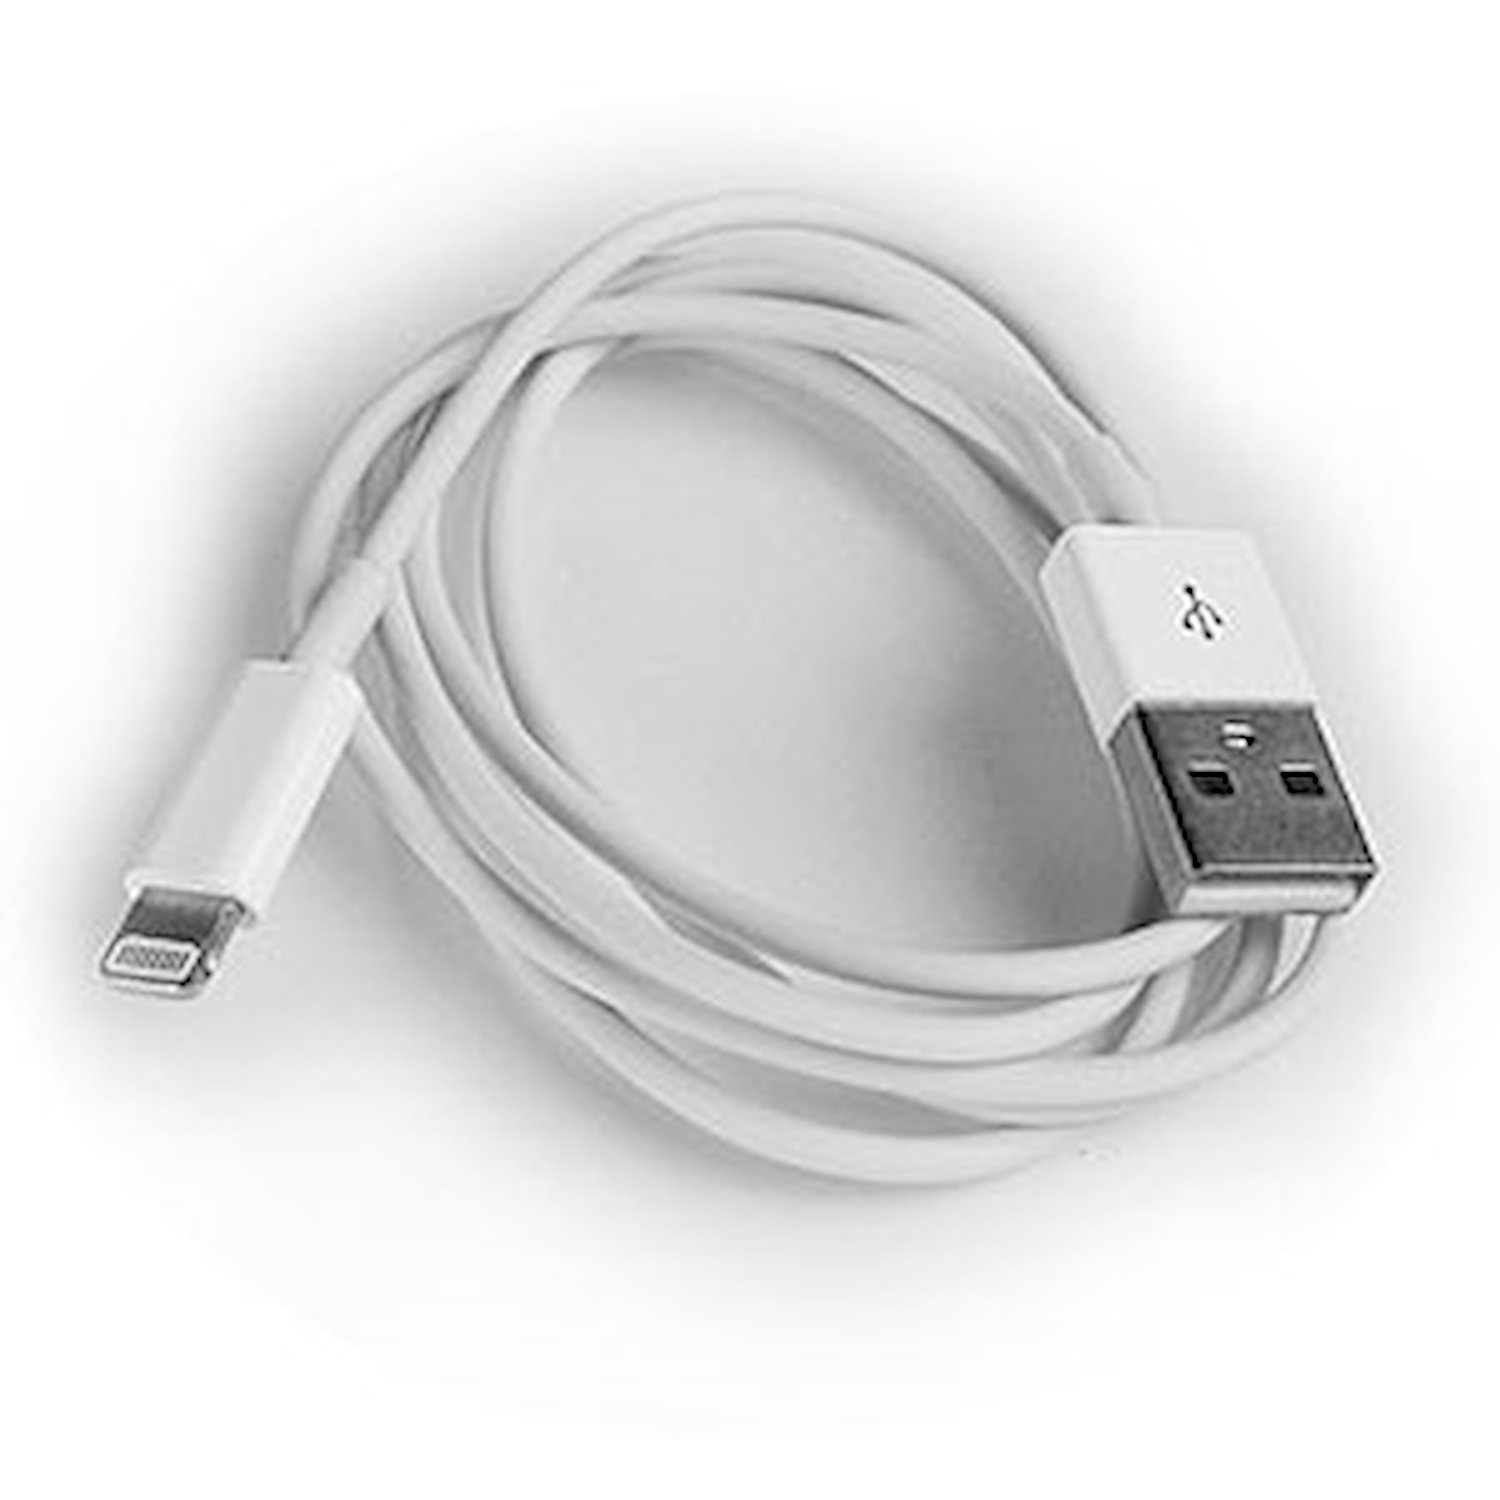 USB Cable Length: 3"